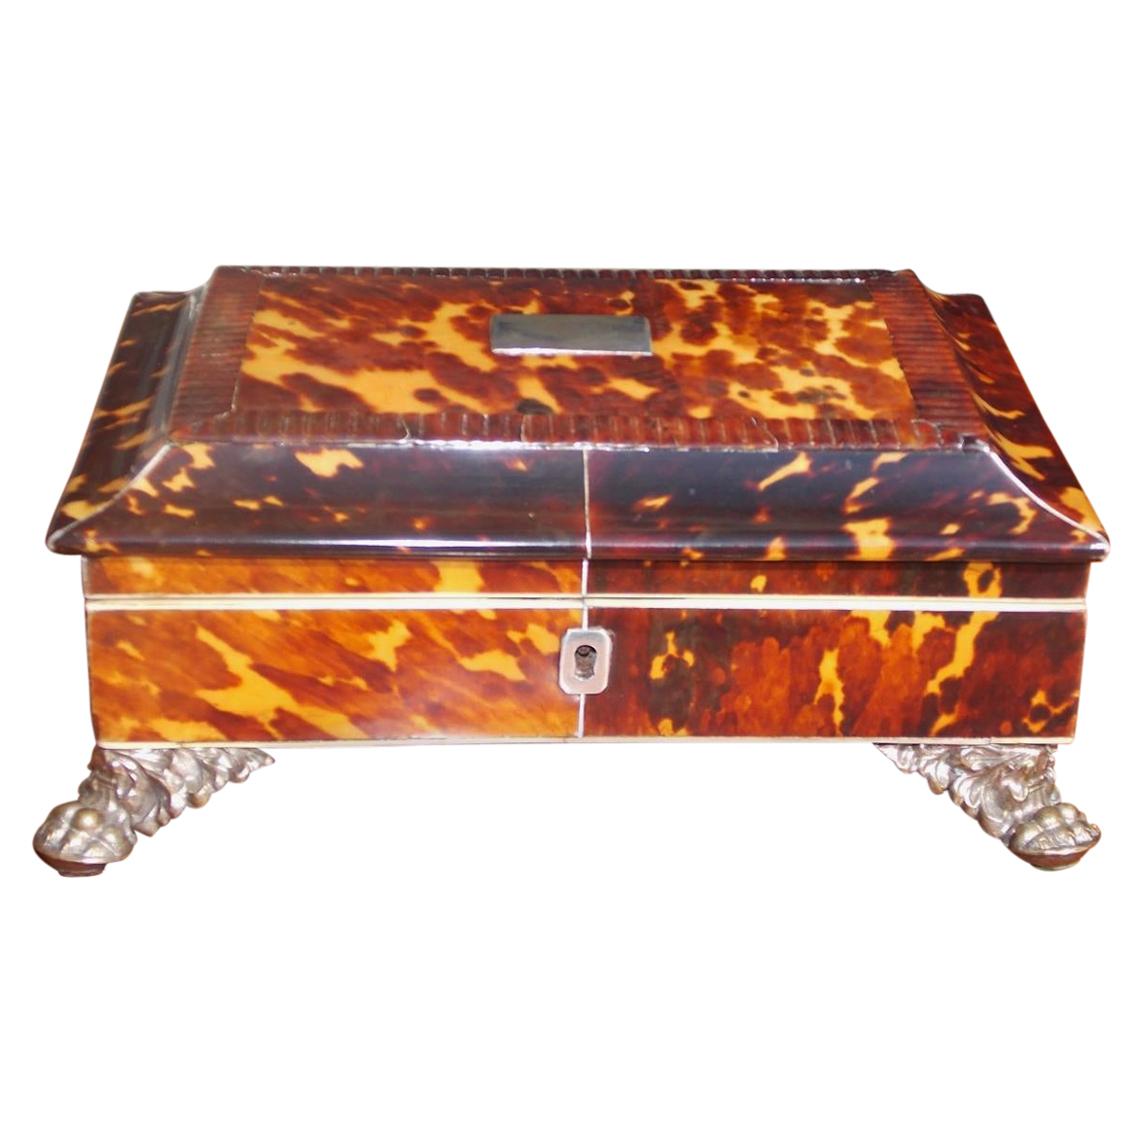 English Georgian Tortoise Shell Sewing Box with Silver Winged Paw Feet, C. 1810 For Sale